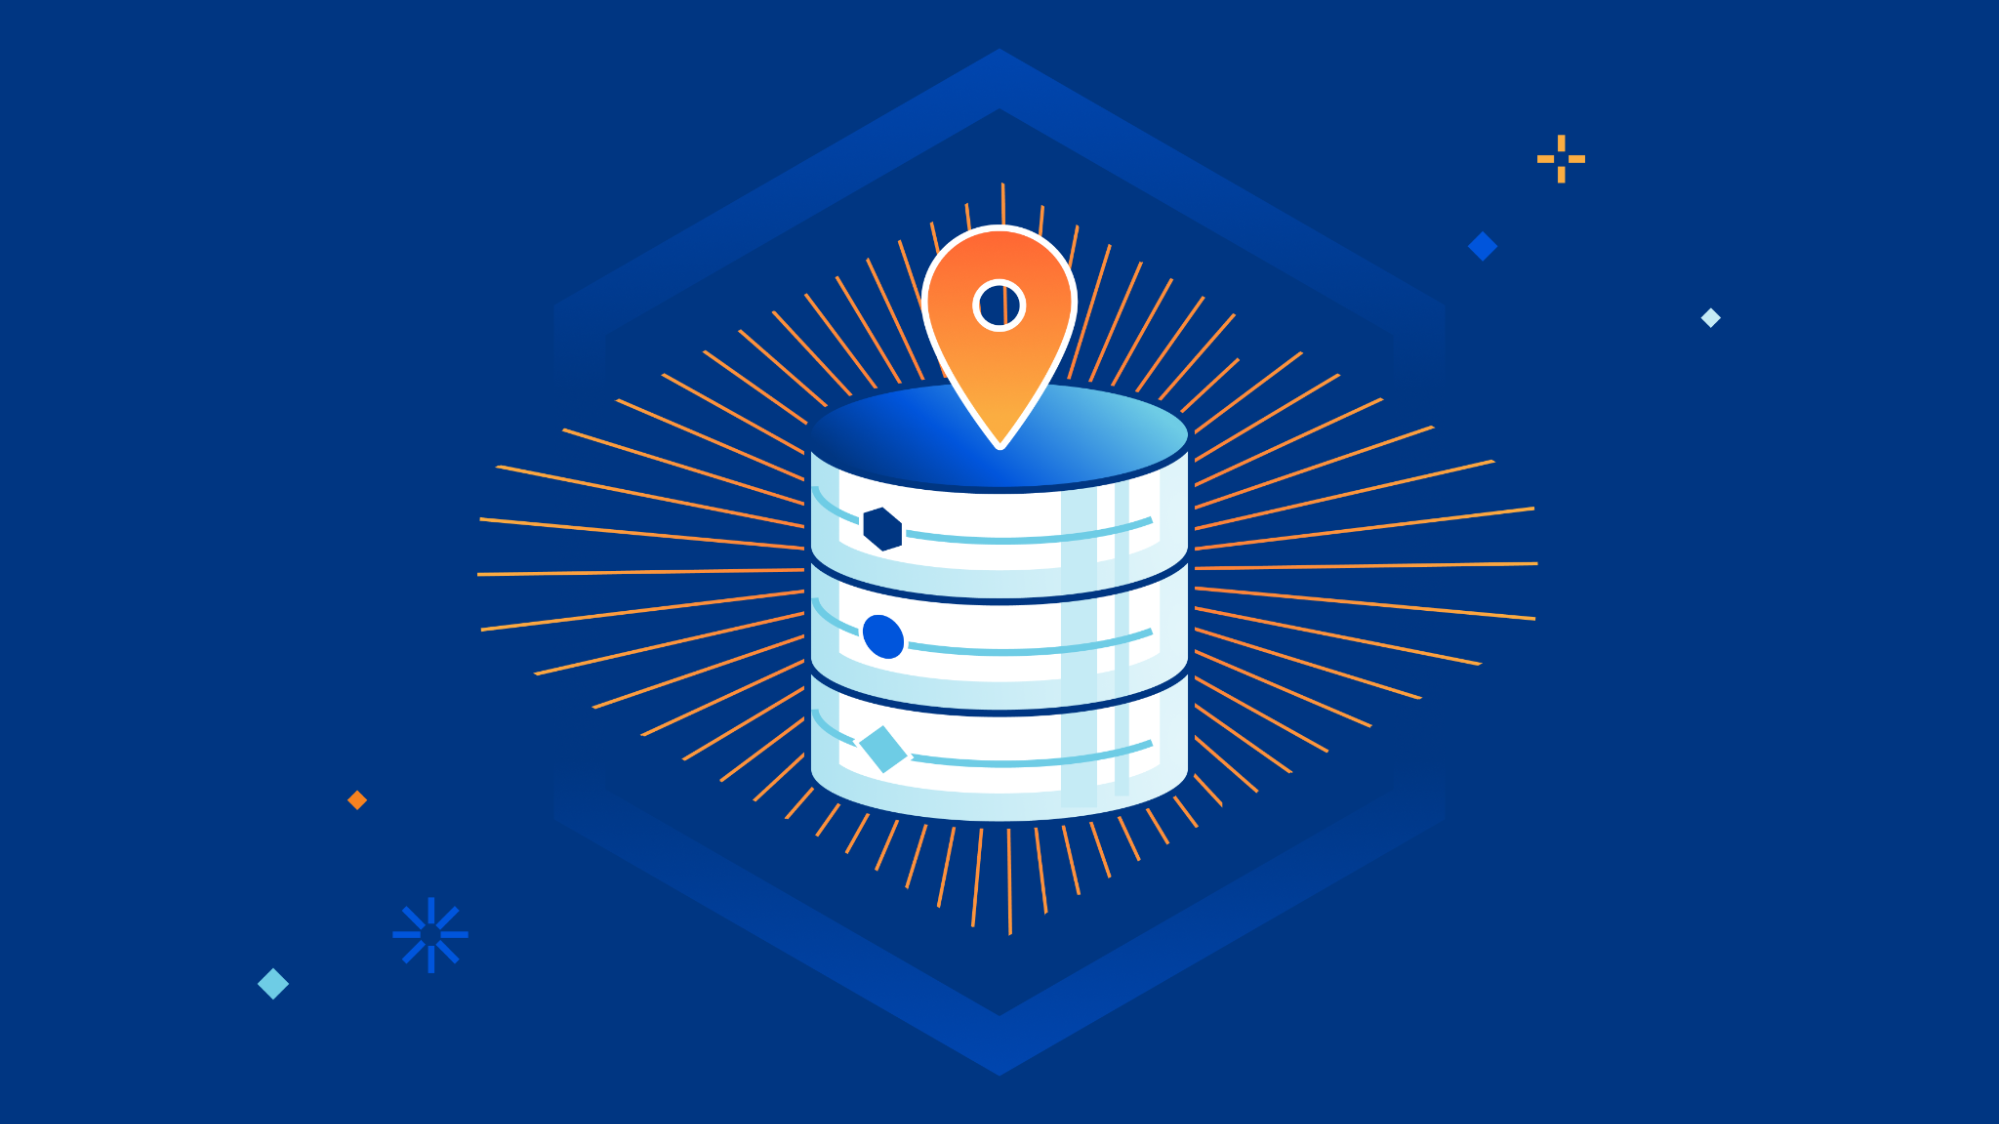 Today we’re excited to announce an update to our Tiered Cache offering: Regional Tiered Cache.